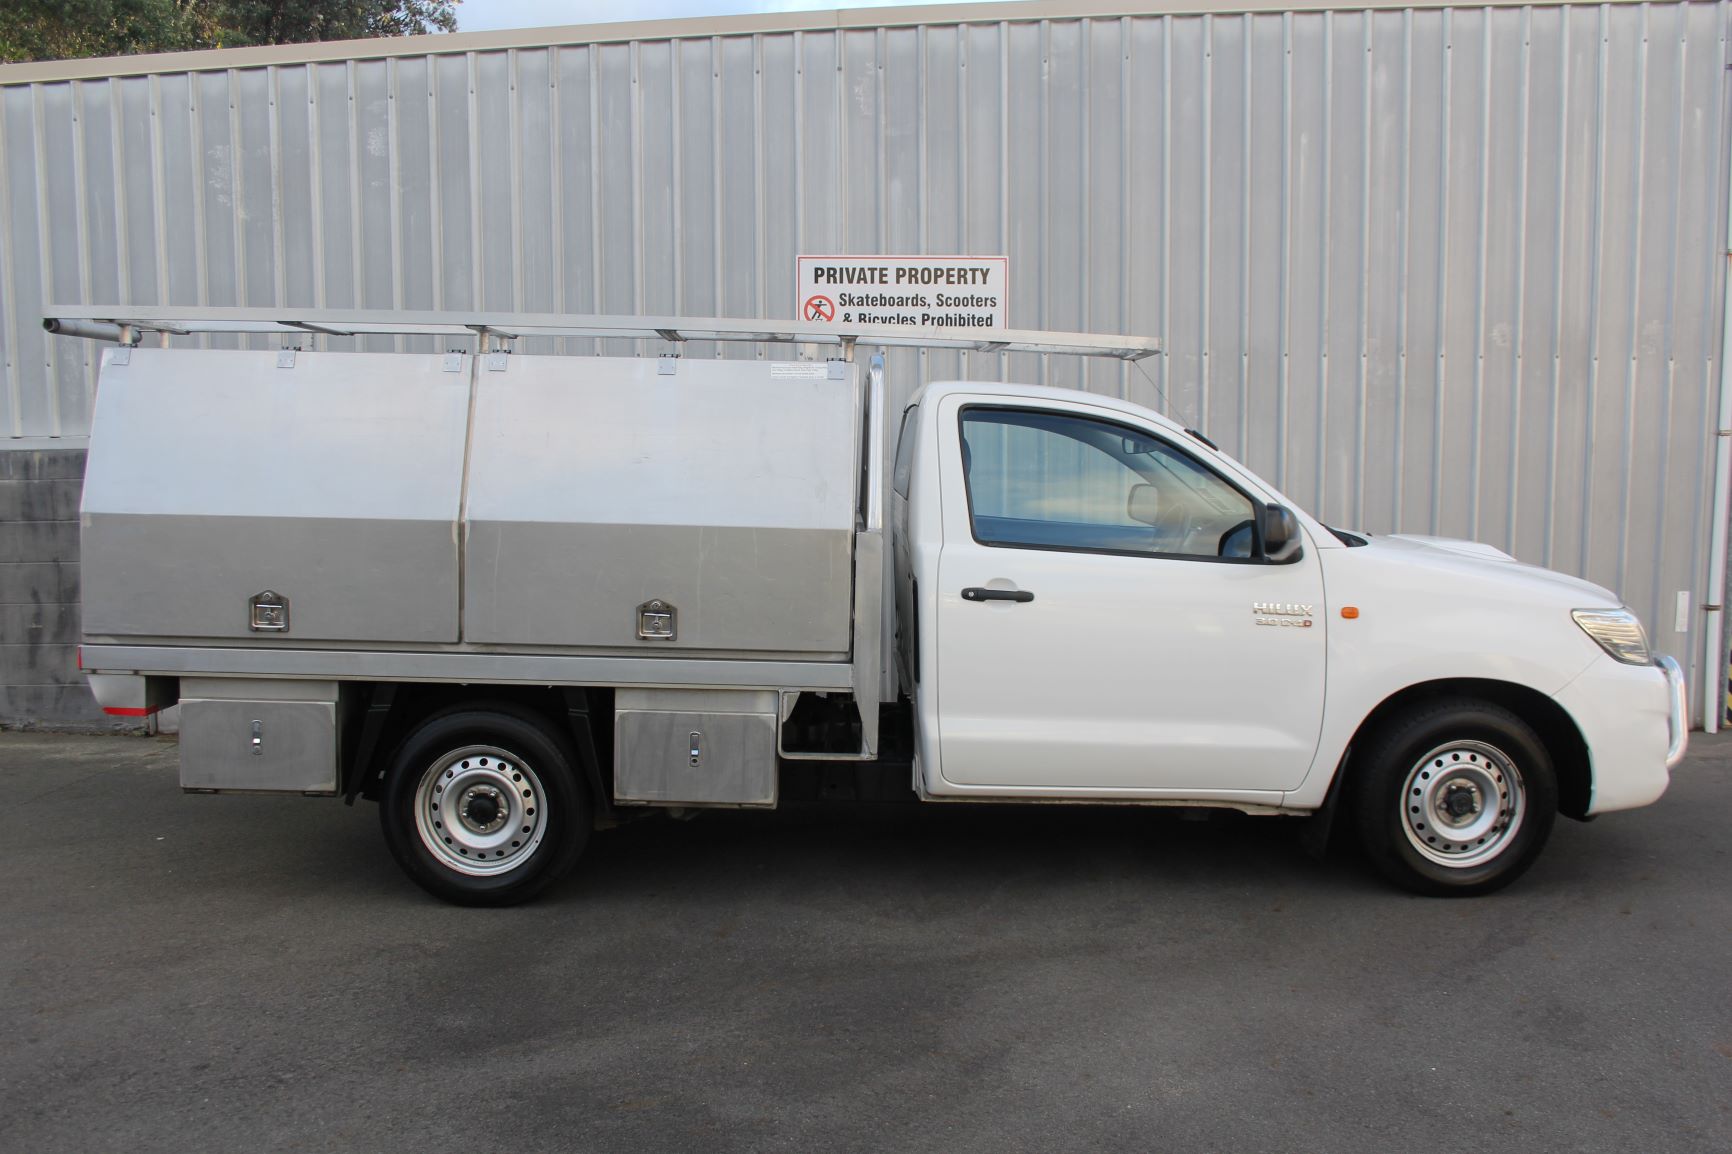 Toyota Hilux 2wd service body 2014 for sale in Auckland